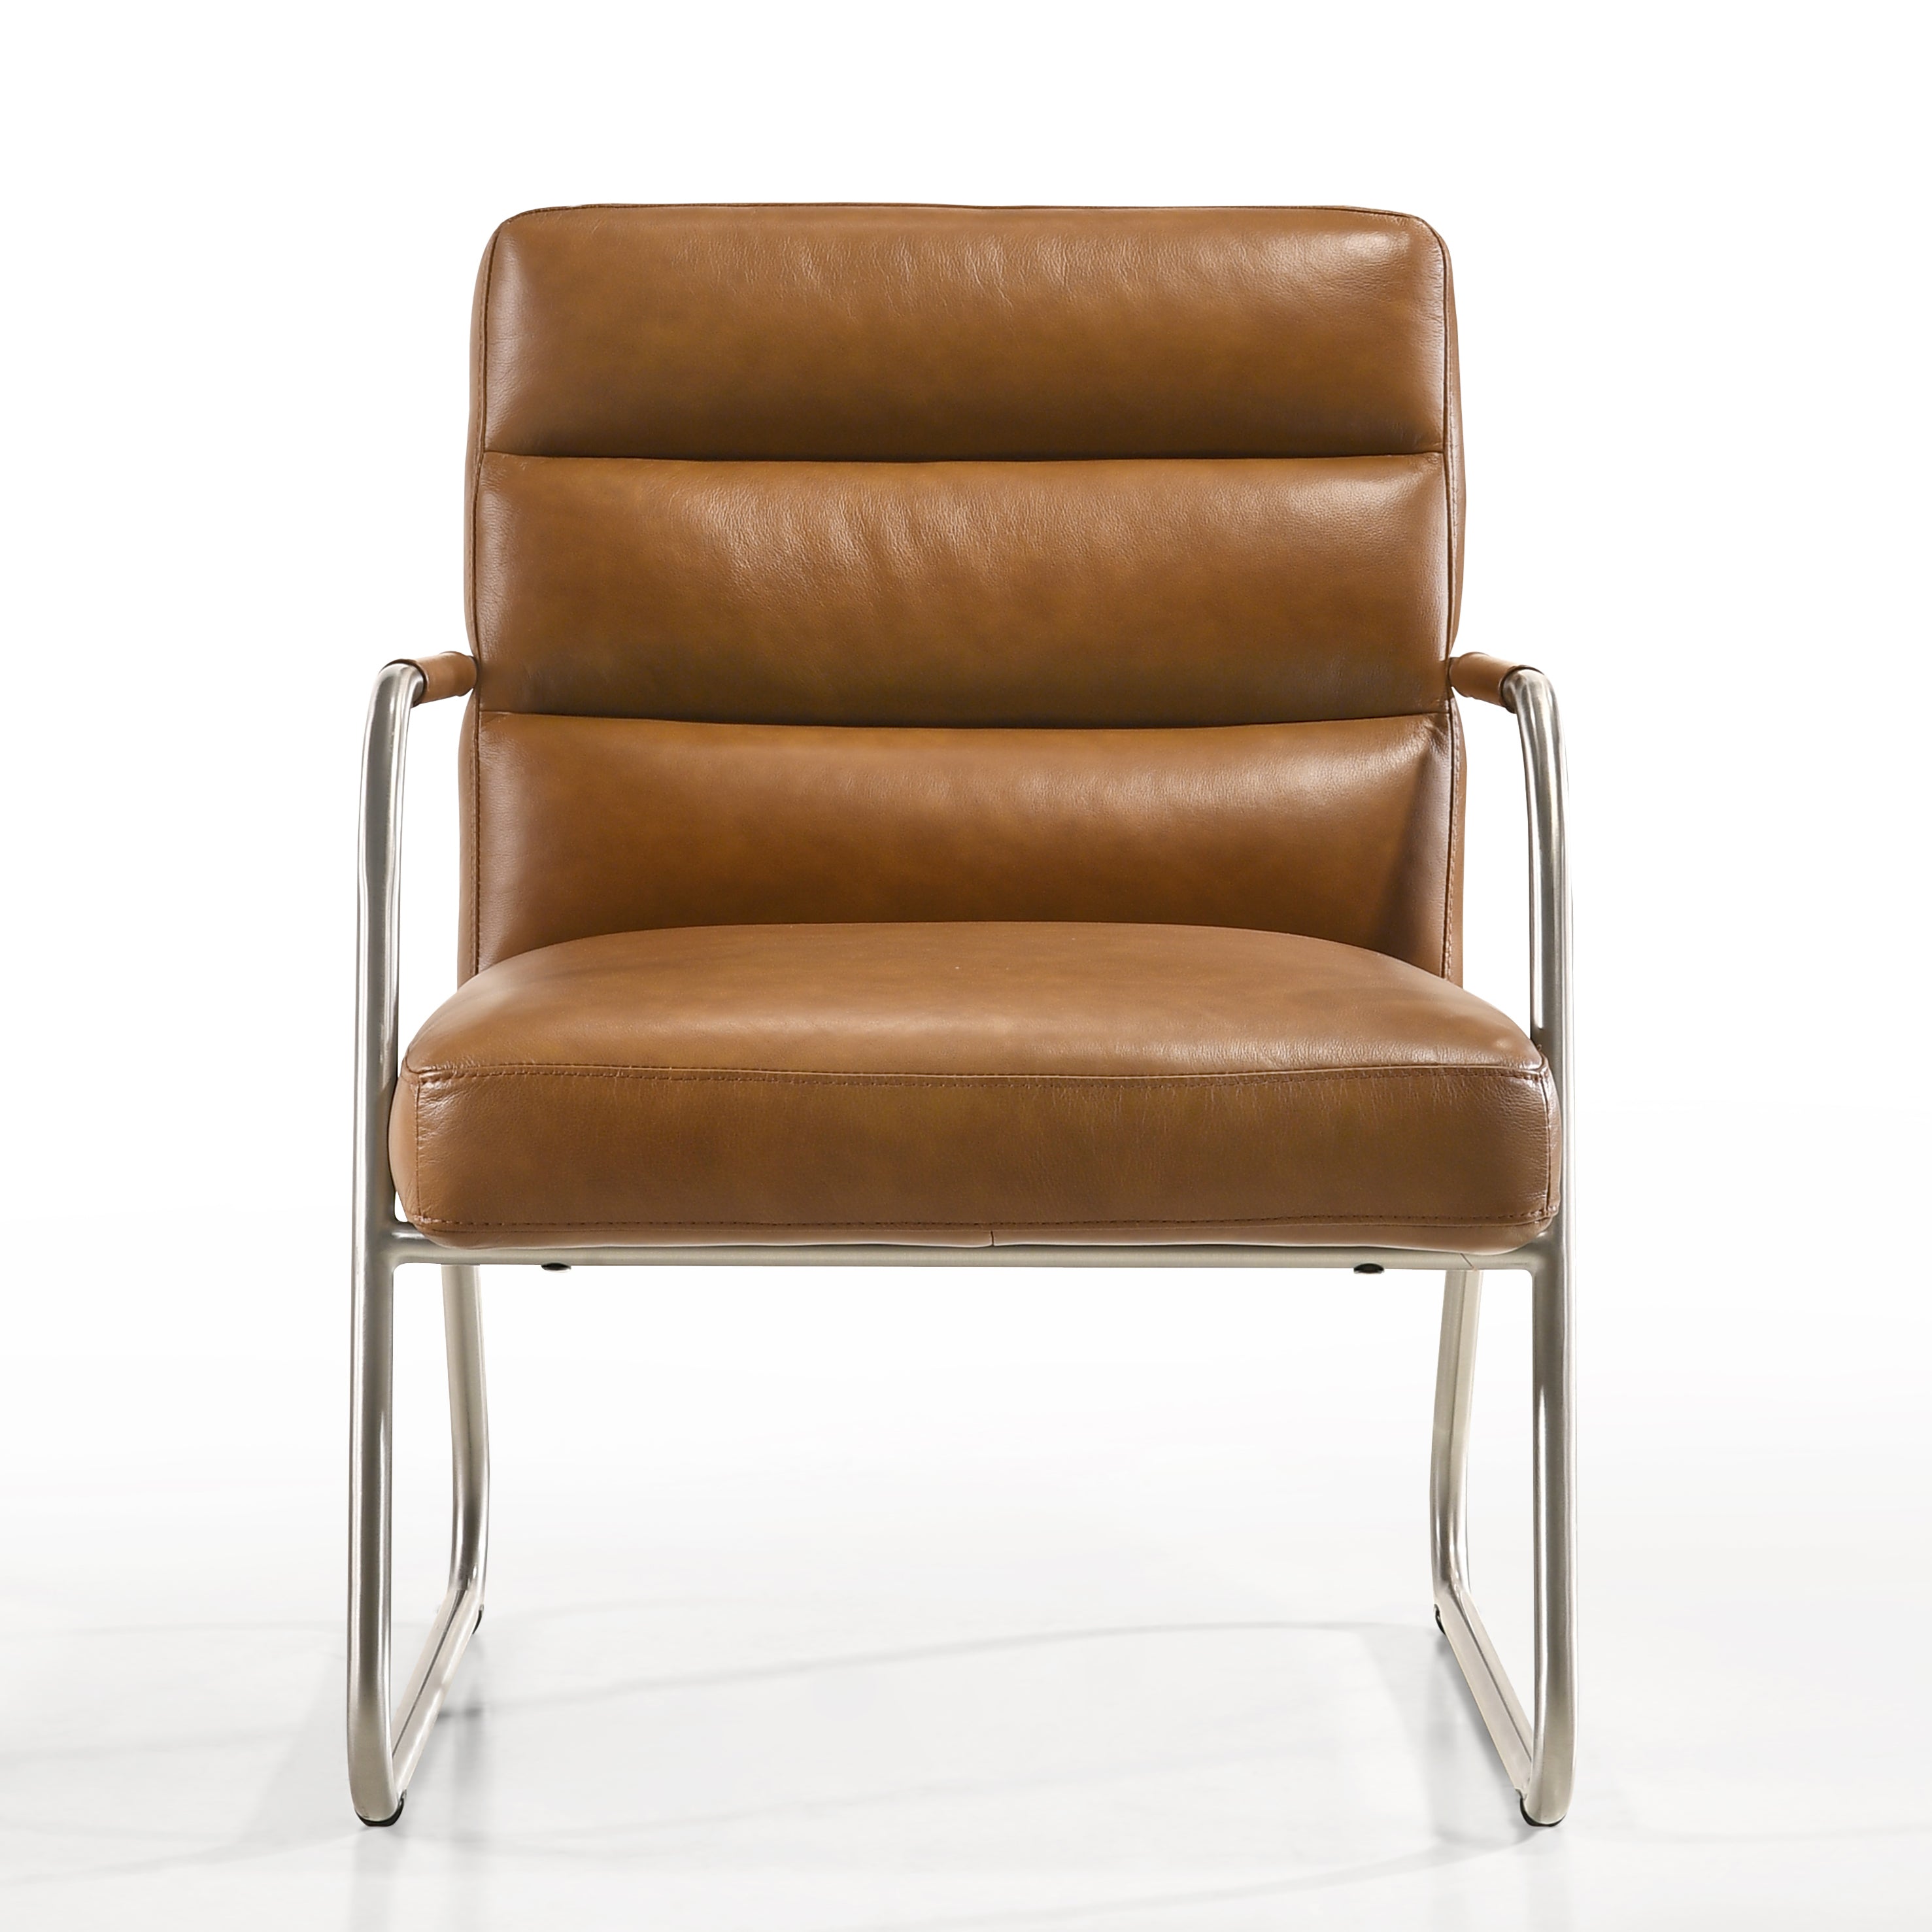 Spencer Stainless Steel Leather Lounge Accent Chair, Caramel Brown